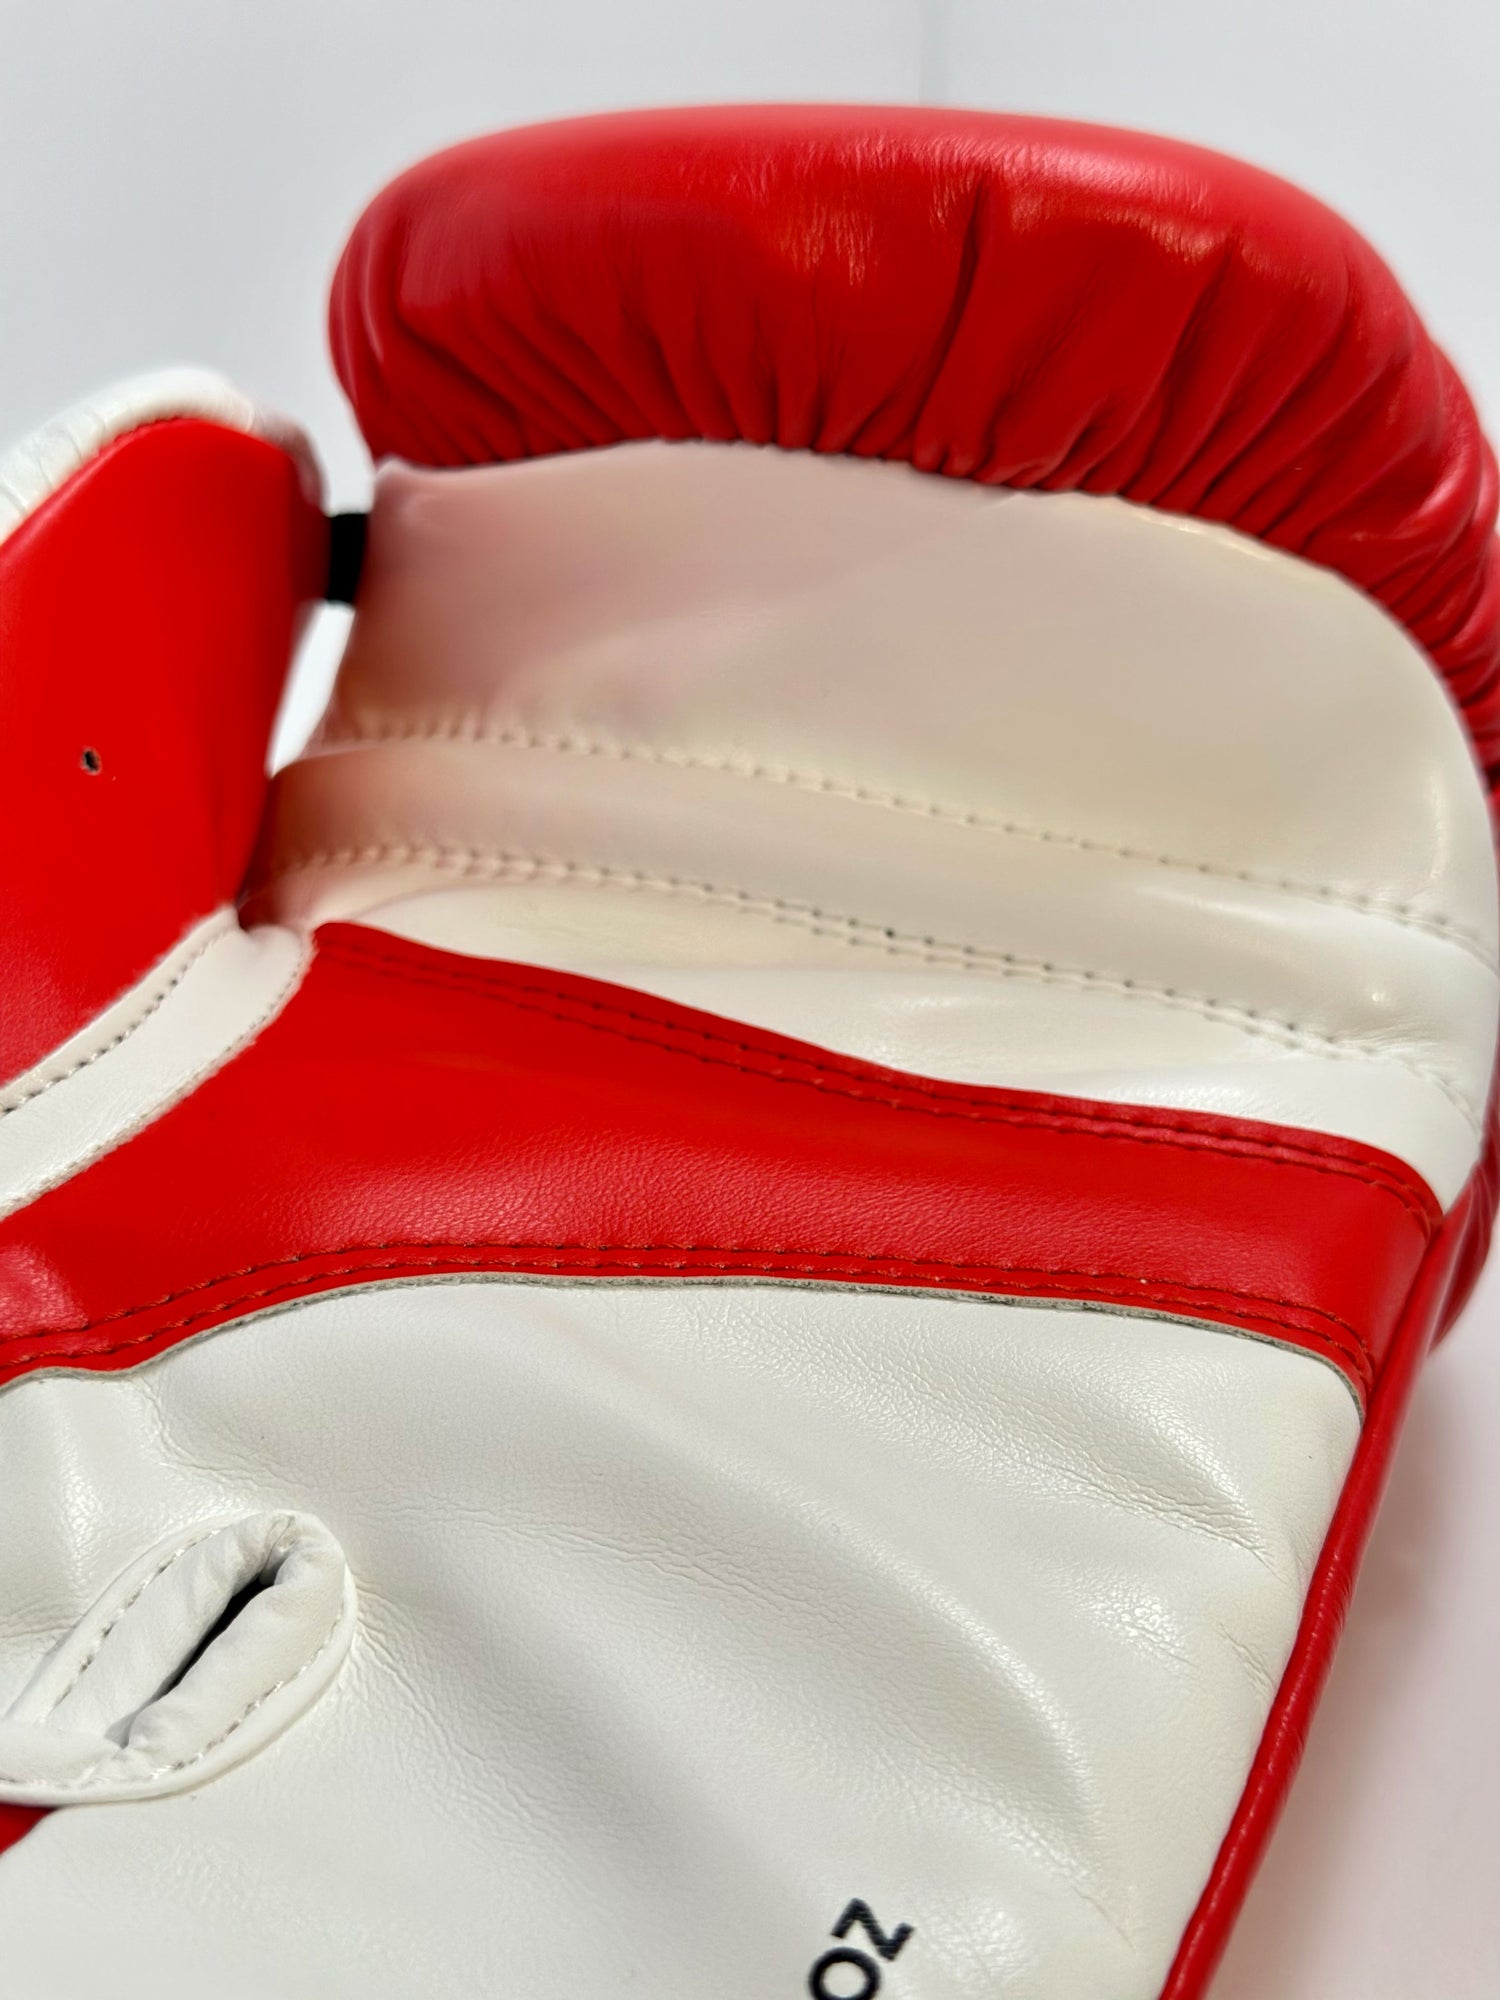 Adidas WAKO Approved Kickboxing Fight Gloves, Cowhide Cuir Leather Speed 165 adiSBG165 Competition Gloves 10 Oz Red palm left hand